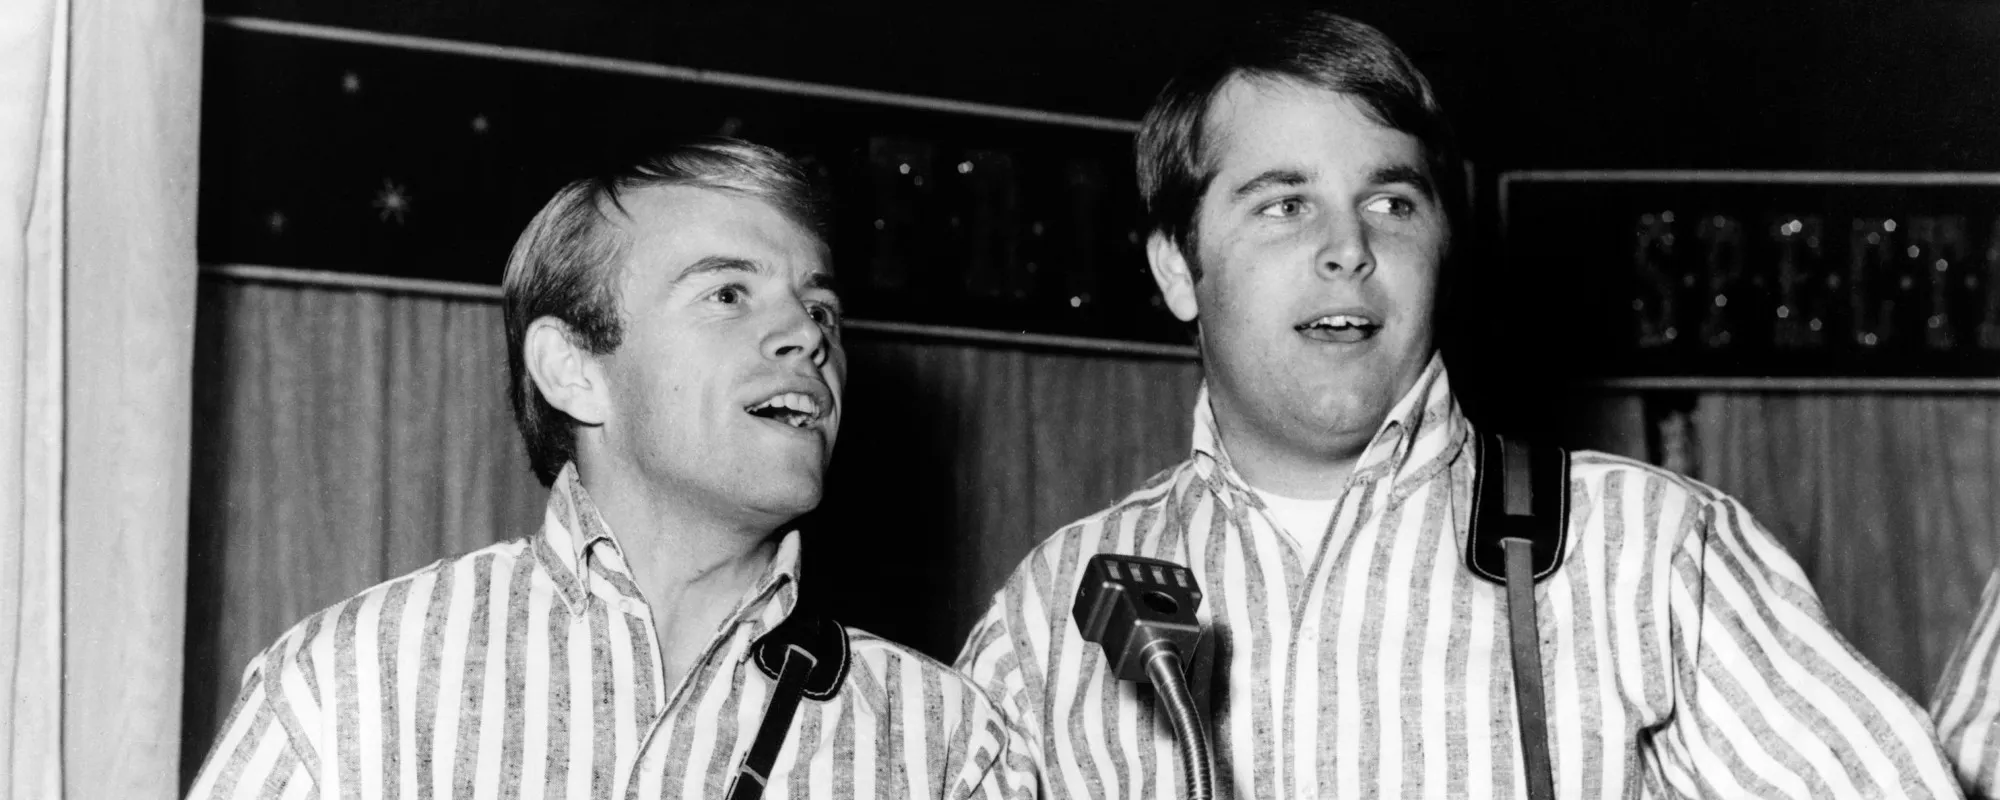 Don’t Trust Anyone Over 30: The Story Behind “When I Grow Up (to Be a Man)” by The Beach Boys